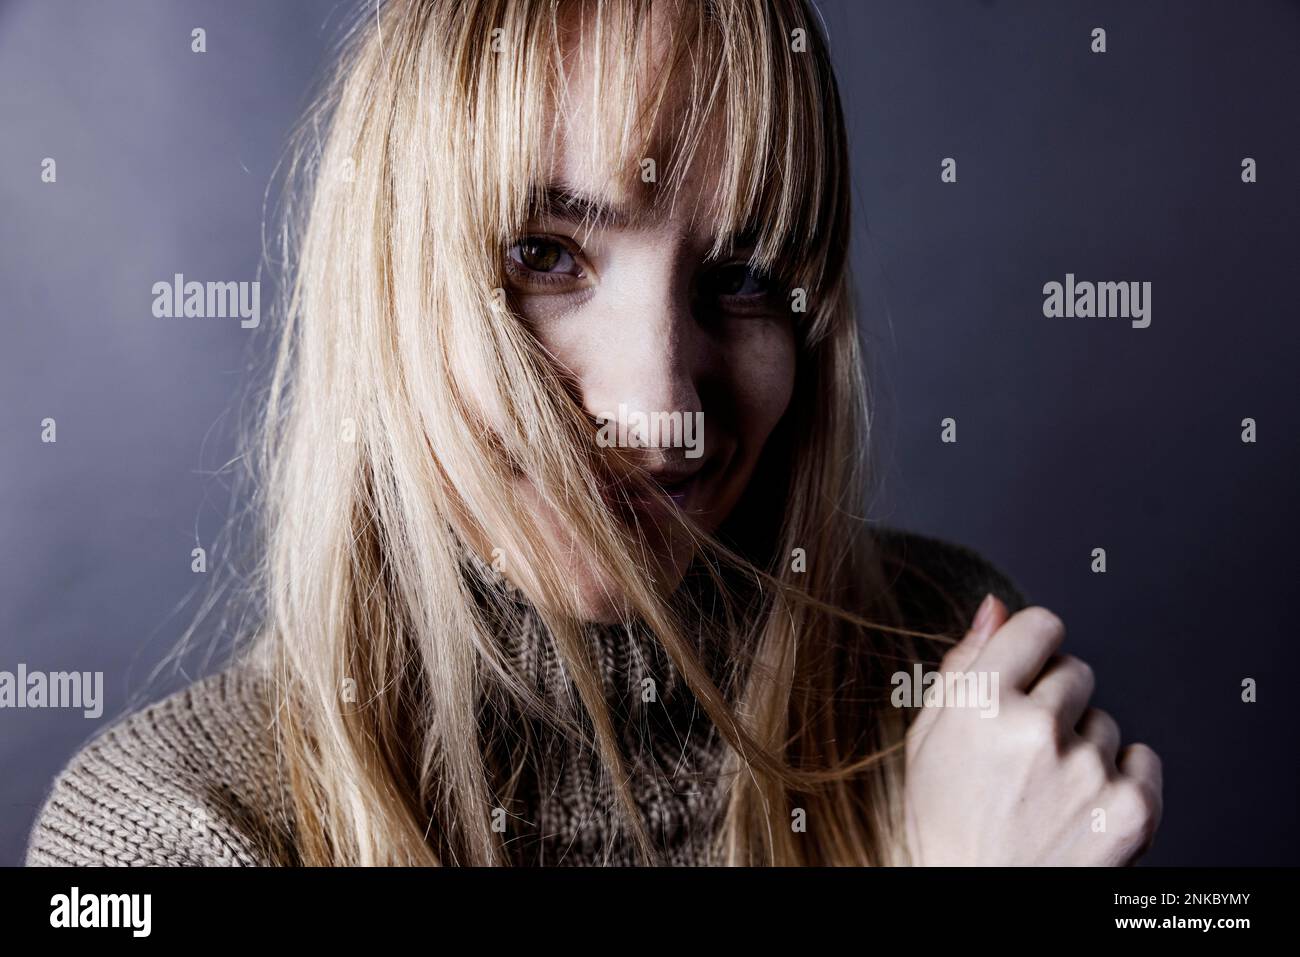 Young woman with long blond hair covers one half of her face with a strand of hair and looks saucily into camera, studio shot, Cologne, portrait Stock Photo